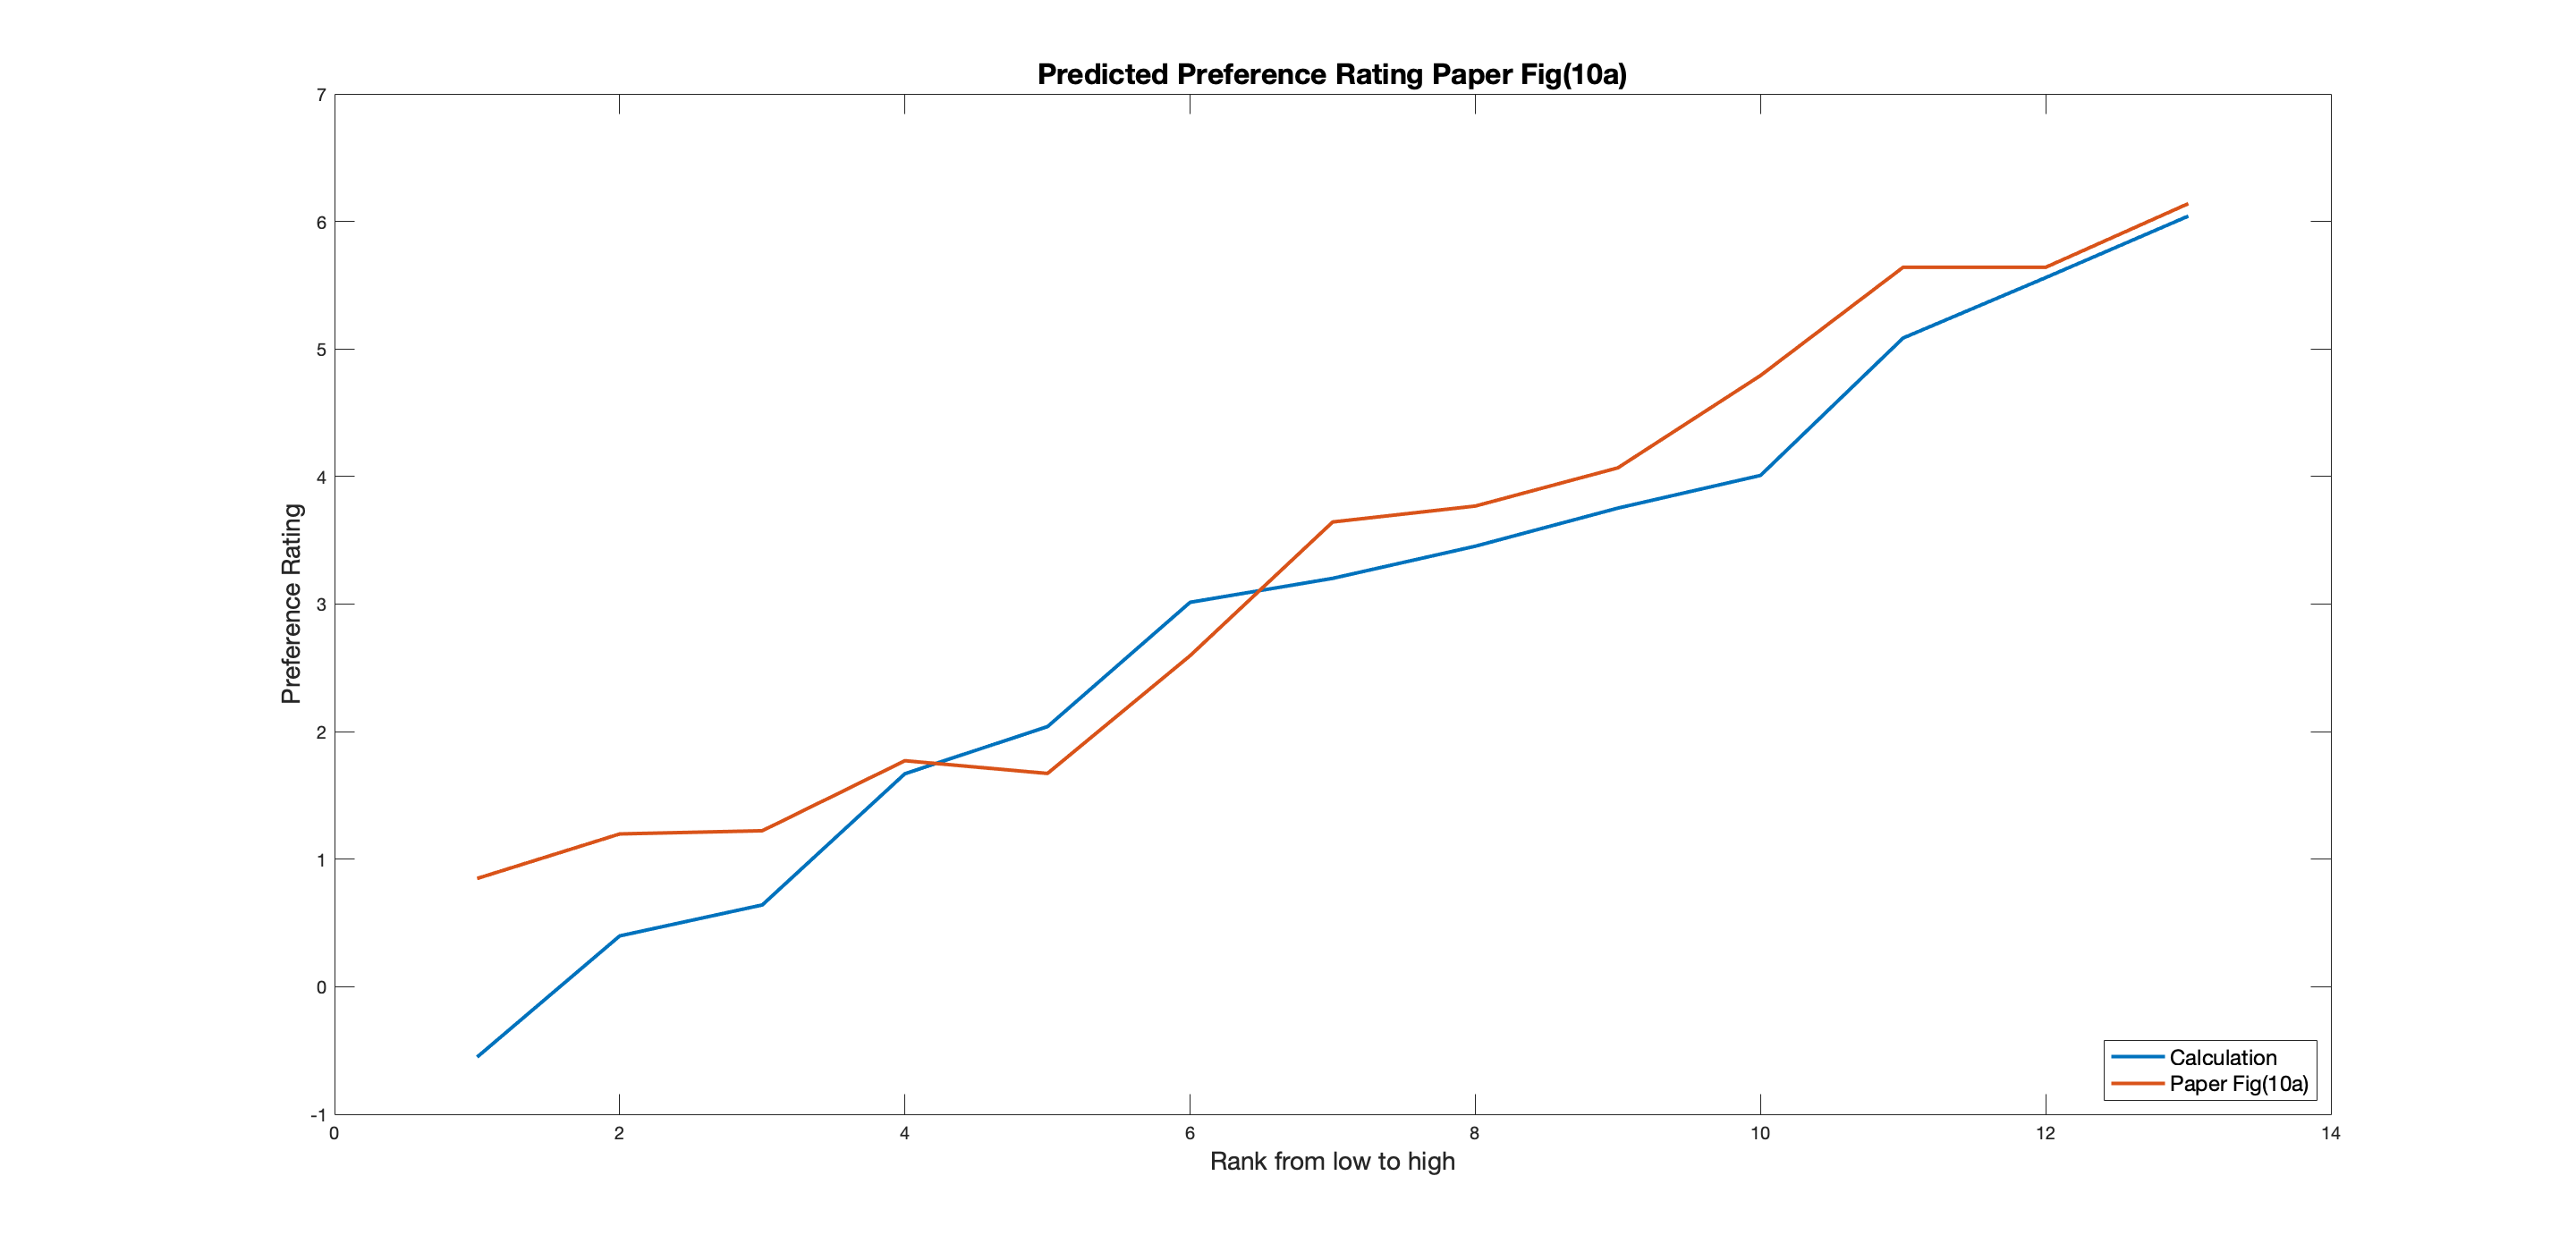 Predicted Score final Model fig10a.png